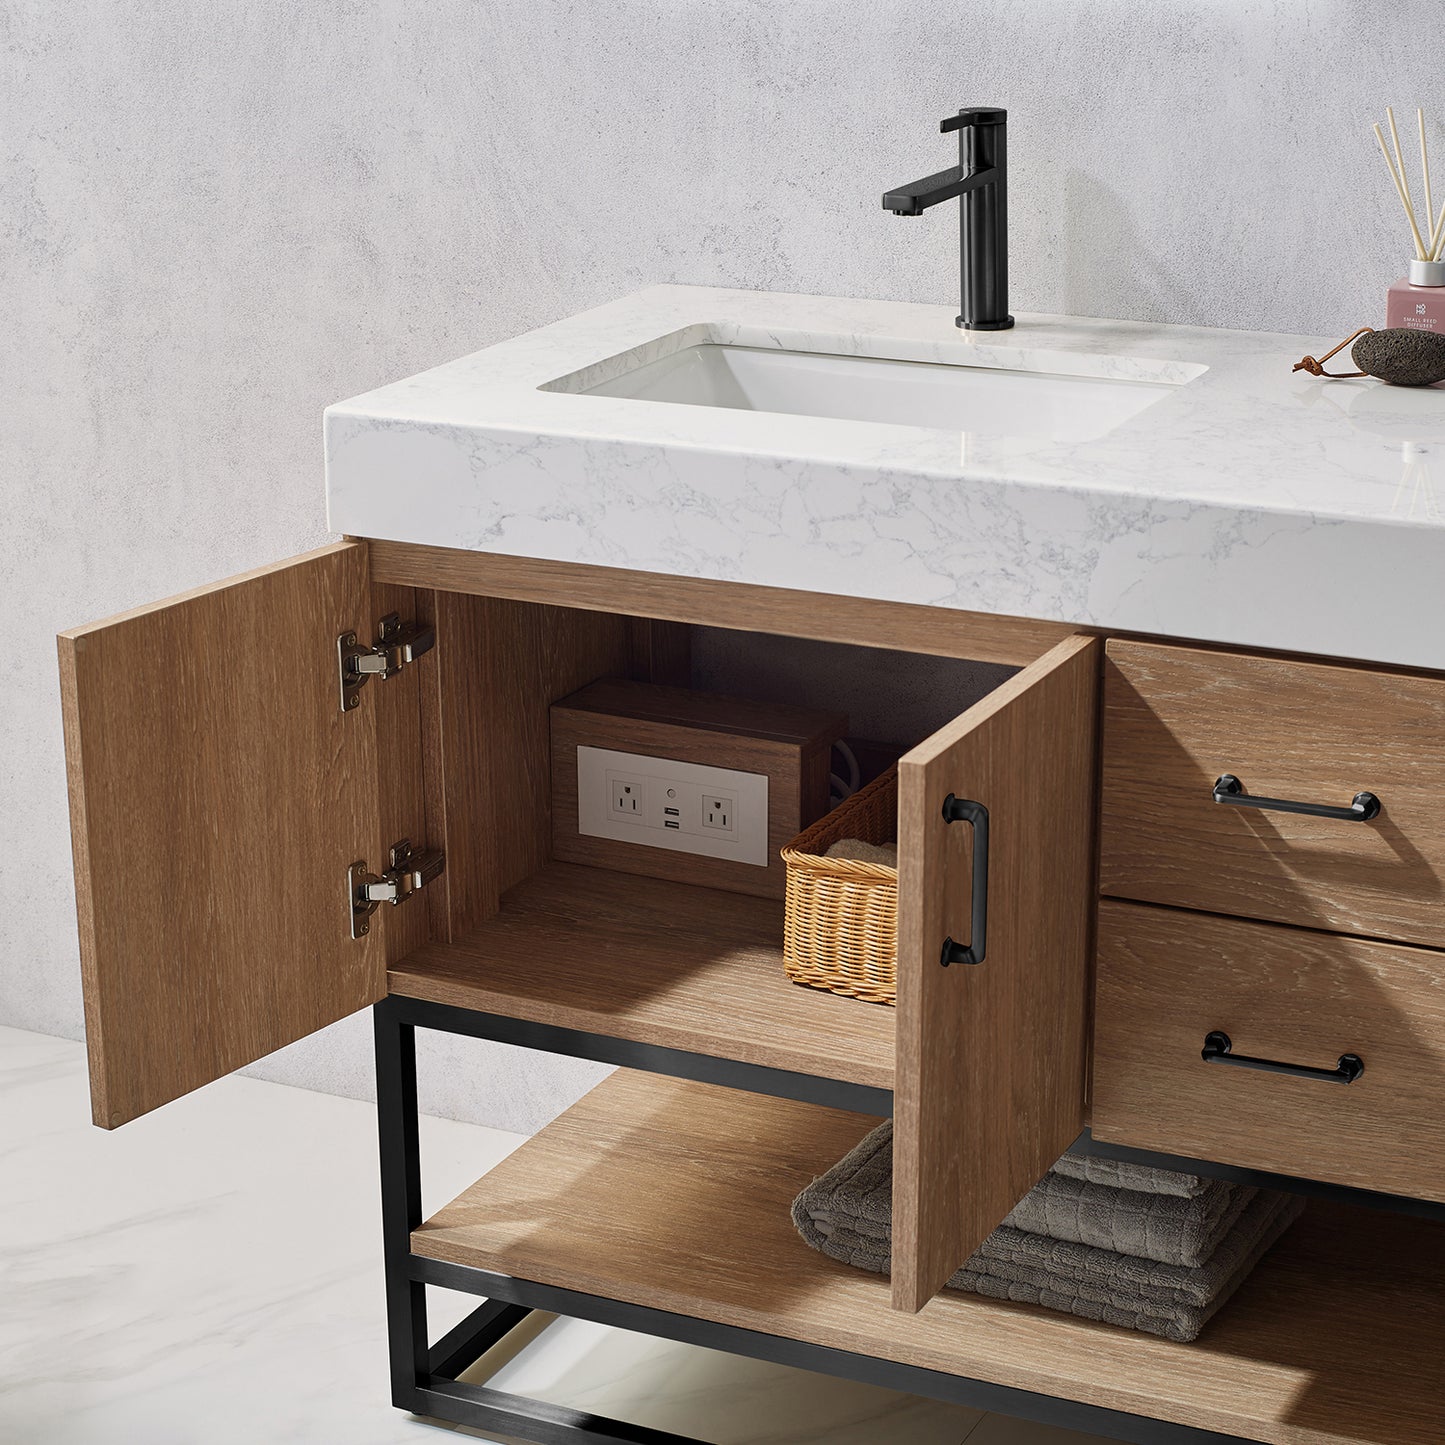 Alistair 60B" Double Vanity in North American Oak with White Grain Stone Countertop With Mirror